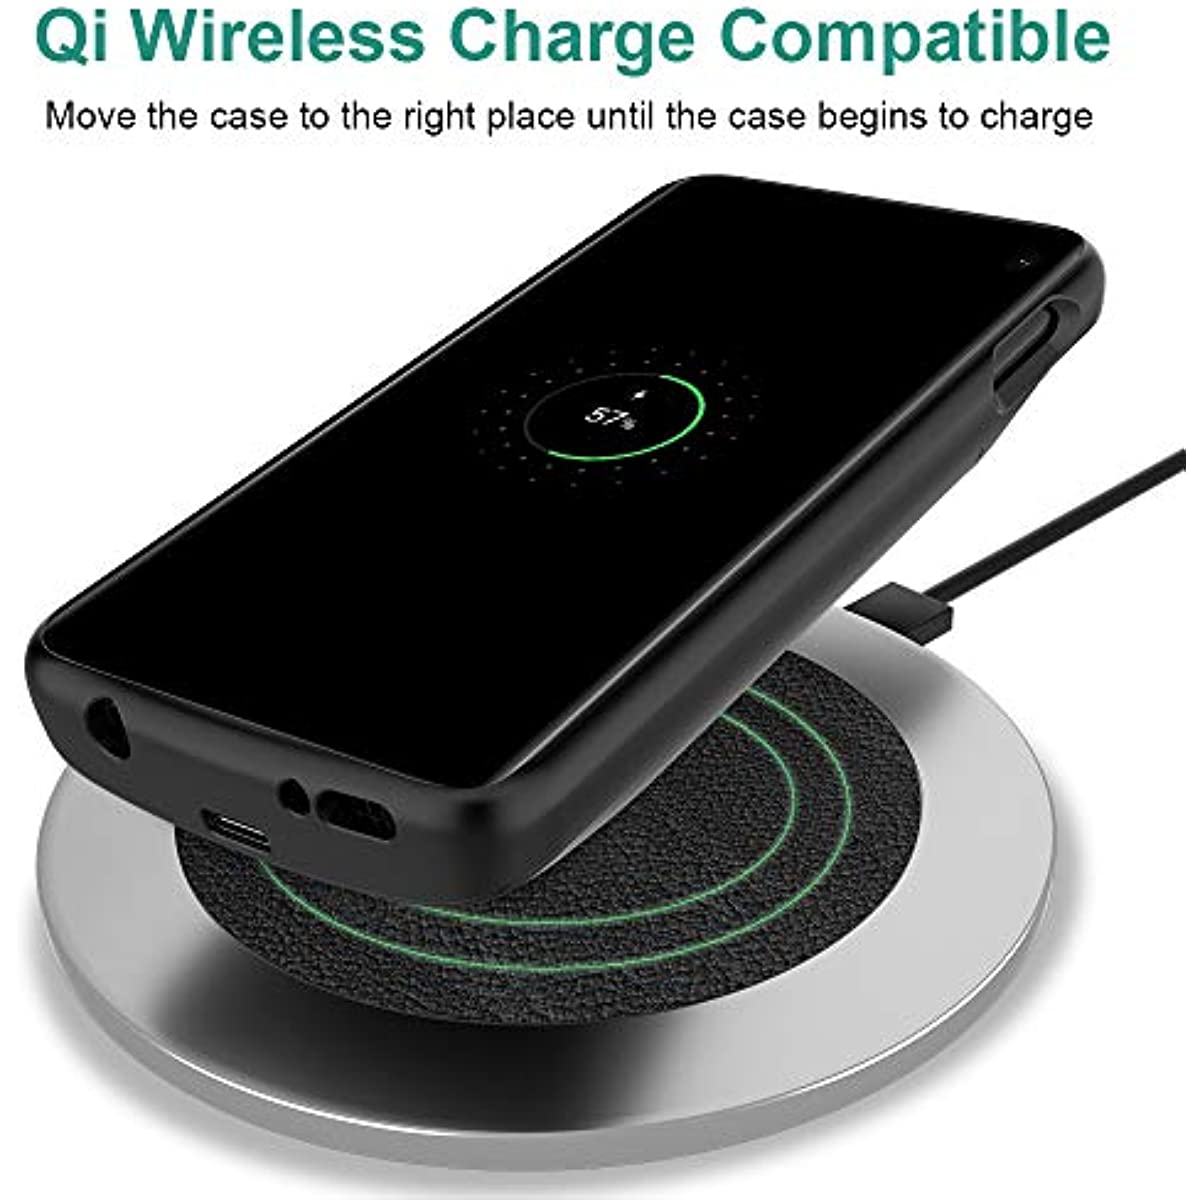 NEWDERY Upgraded Samsung Galaxy S10E Battery Case Qi Wireless Charging Compatible, 4700mAh Slim Rechargeable Portable Extended Charger Case Compatible for Samsung Galaxy S10E (5.8 Inches Black)